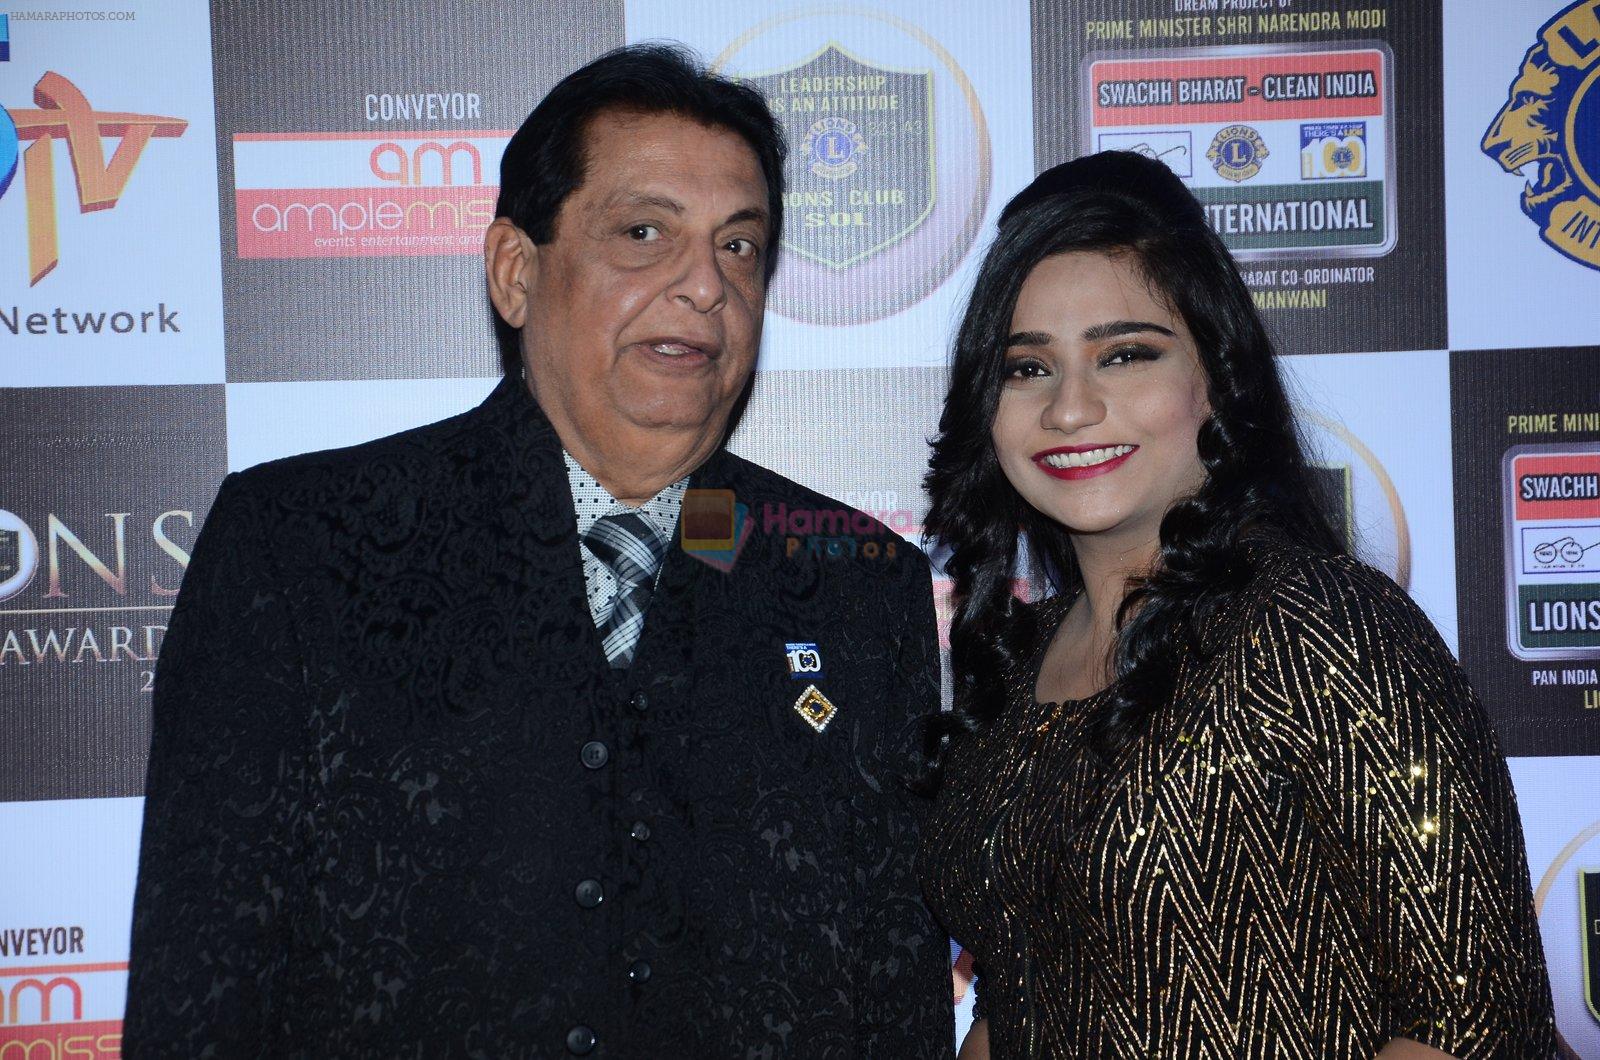 at Lions Awards 2016 on 22nd Jan 2016